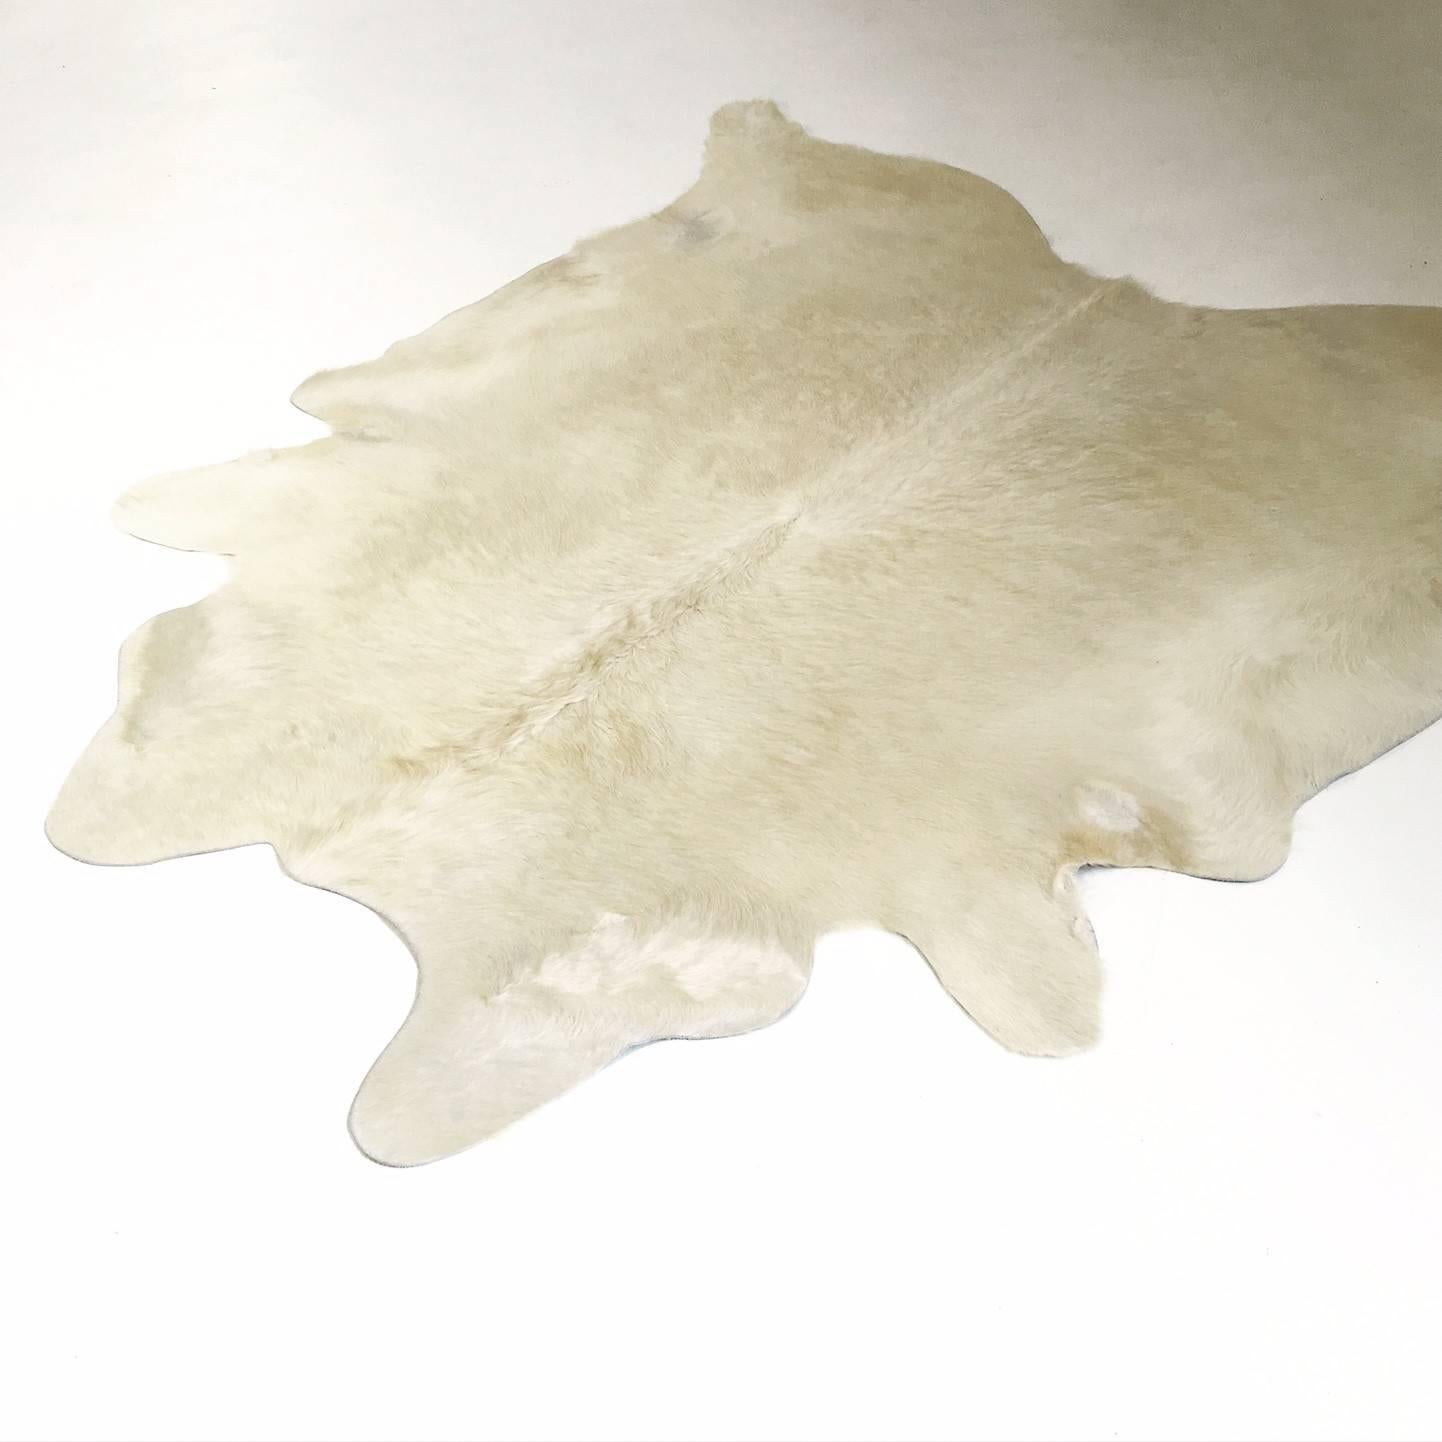 This hide is a natural ivory cowhide rug, a rare hide color. This rug has been hand-selected by our critical-eyed Forsyth team and meets our high standards of hair quality, coloring, tanning excellence and size. You will not find a cowhide rug as